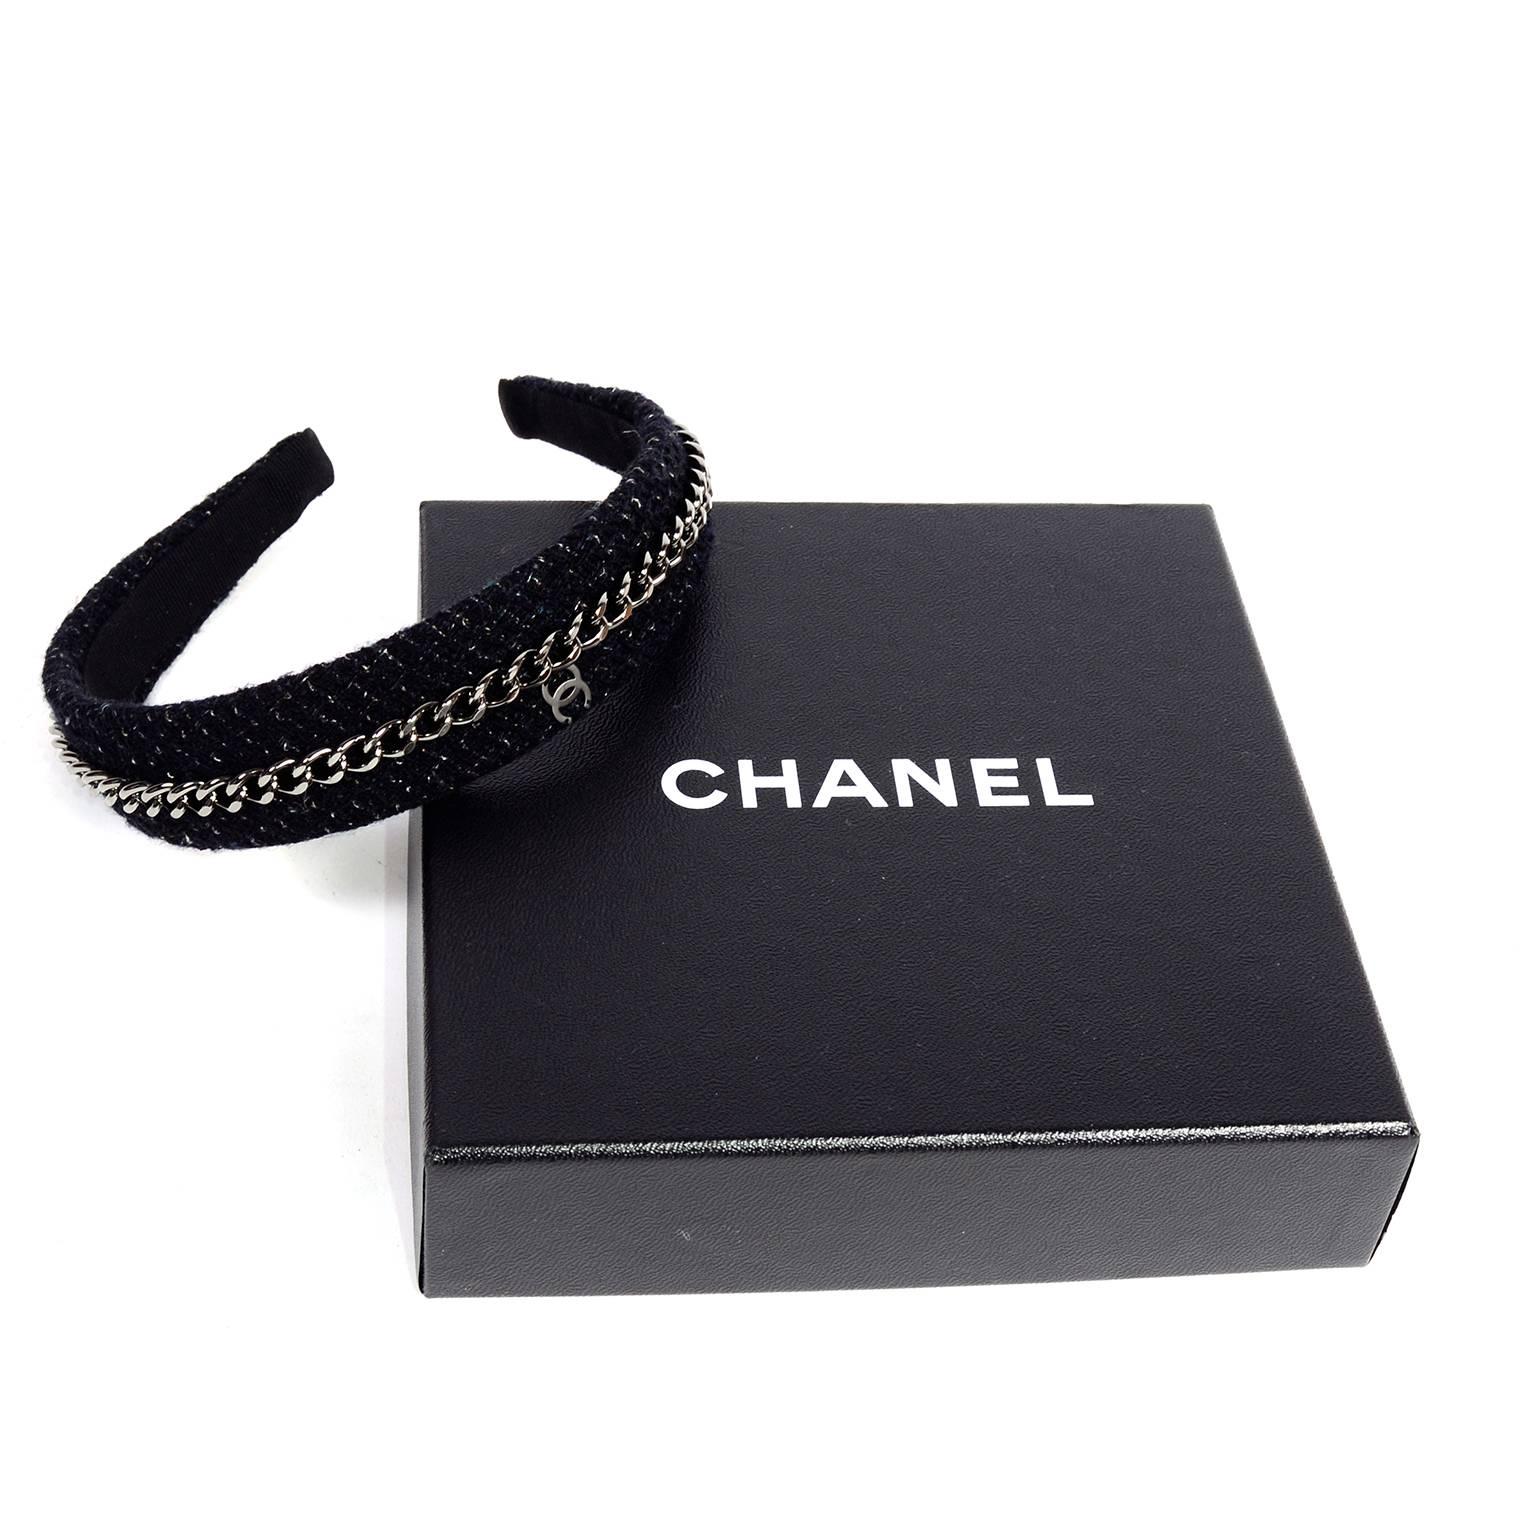 This is a classic Chanel Headband in a gorgeous charcoal and black metallic tweed with a metal chain running the length of the crown and a CC monogram metal logo.  The headband comes in its original box and appears unworn. What a great way to wear a